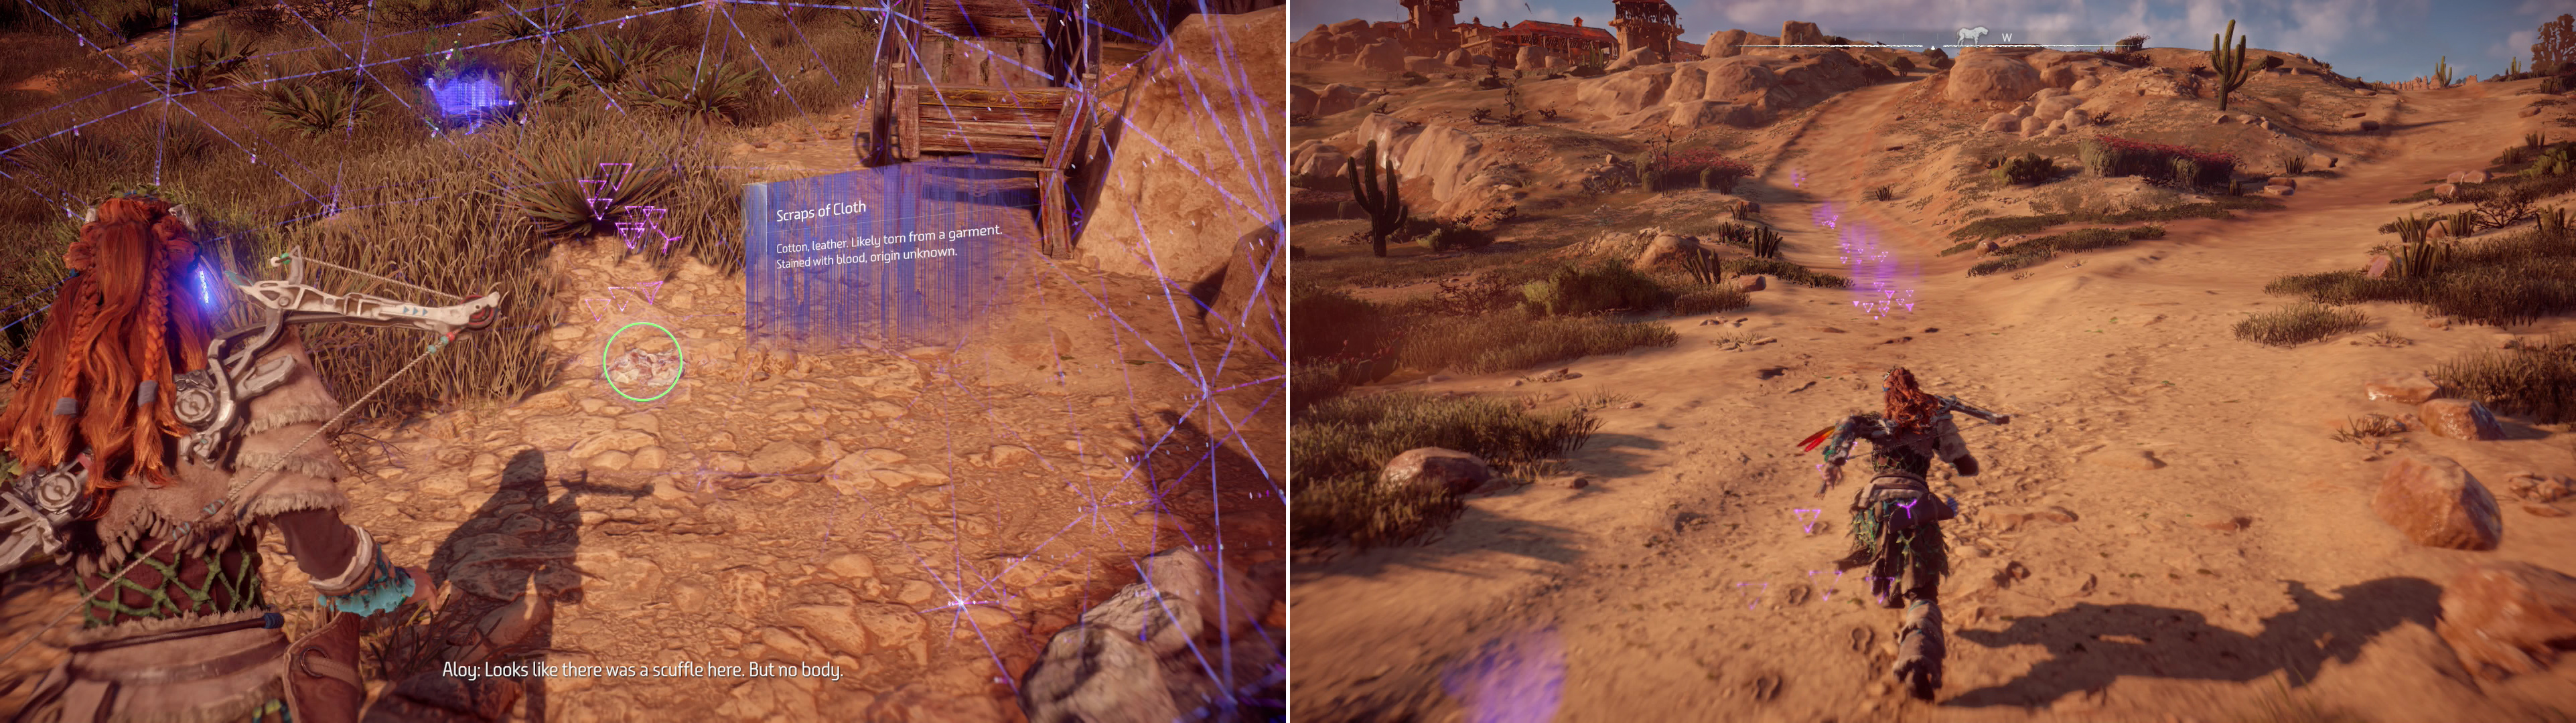 Use your Focus to scan the Campfire (left) then follow the trail you pick up to the west (right).